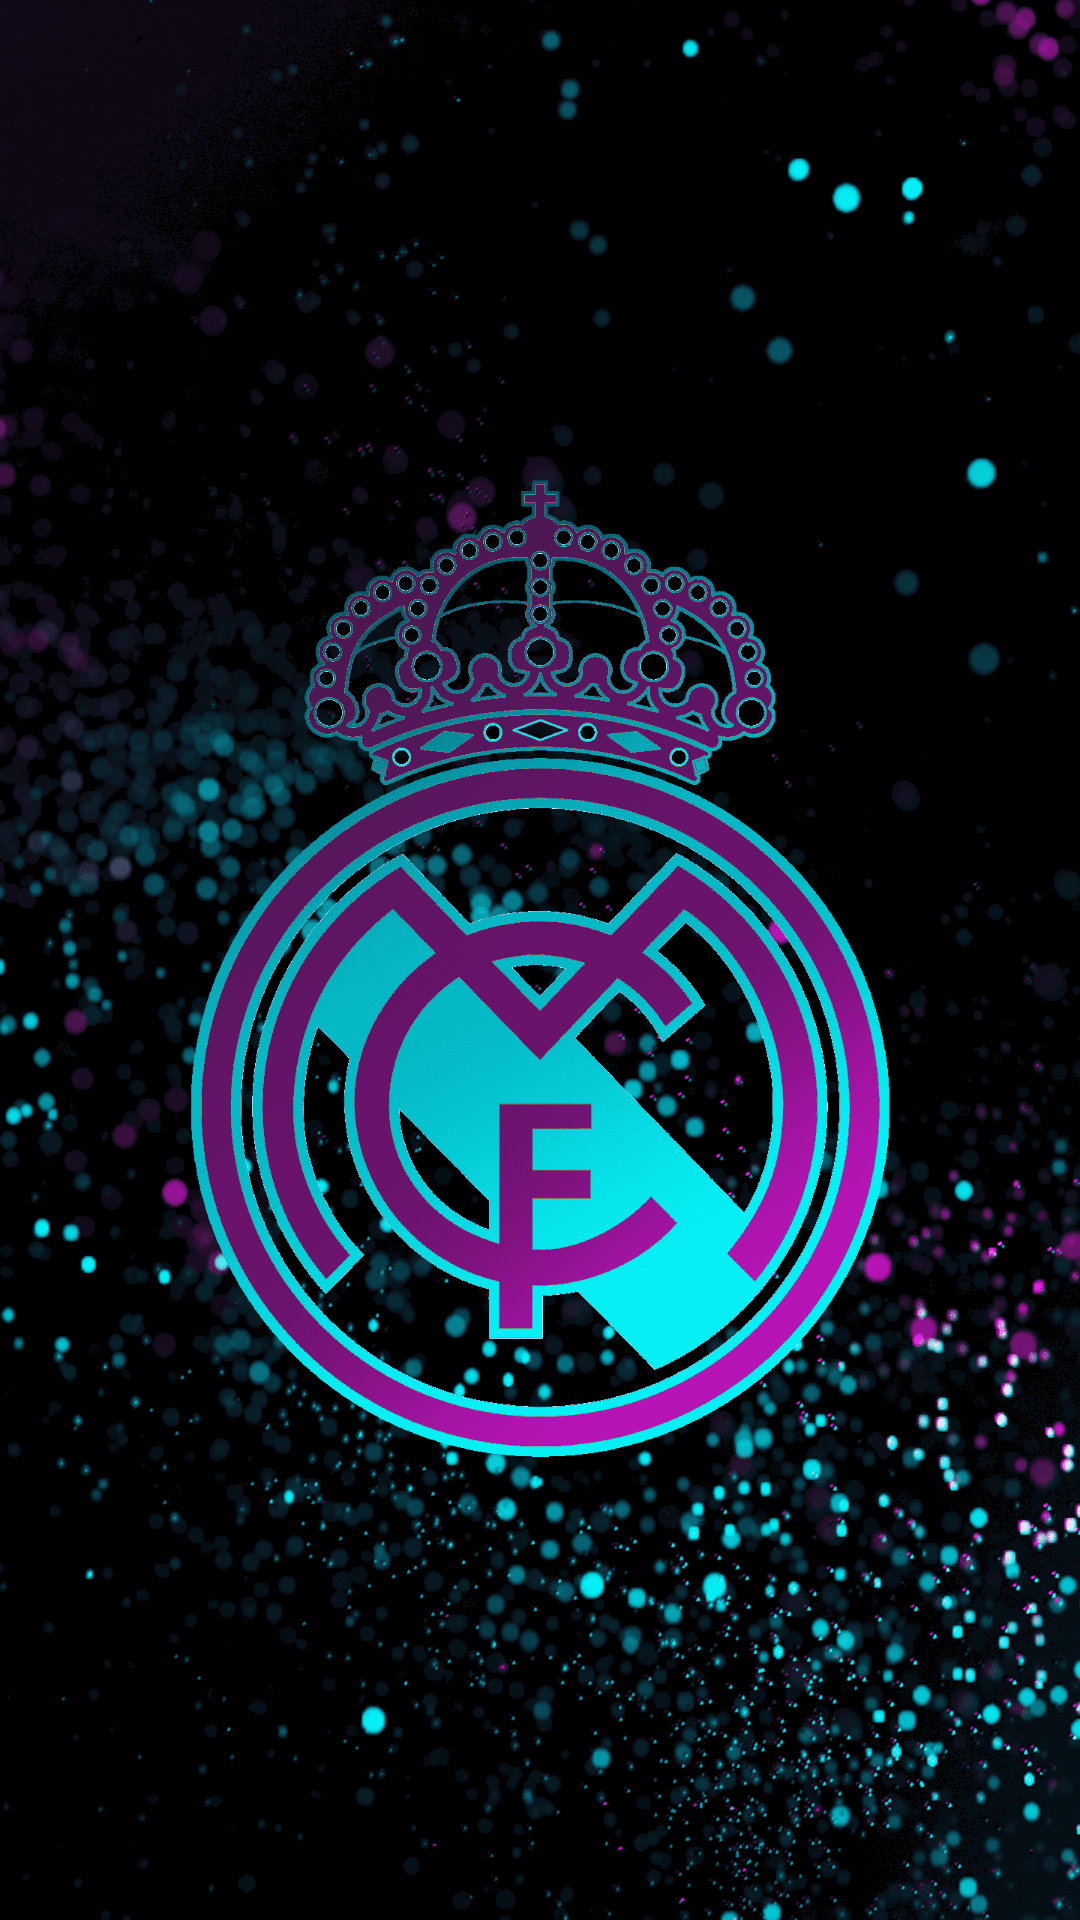 Real Madrid Wallpapers - Top 35 Best Real Madrid Backgrounds Download